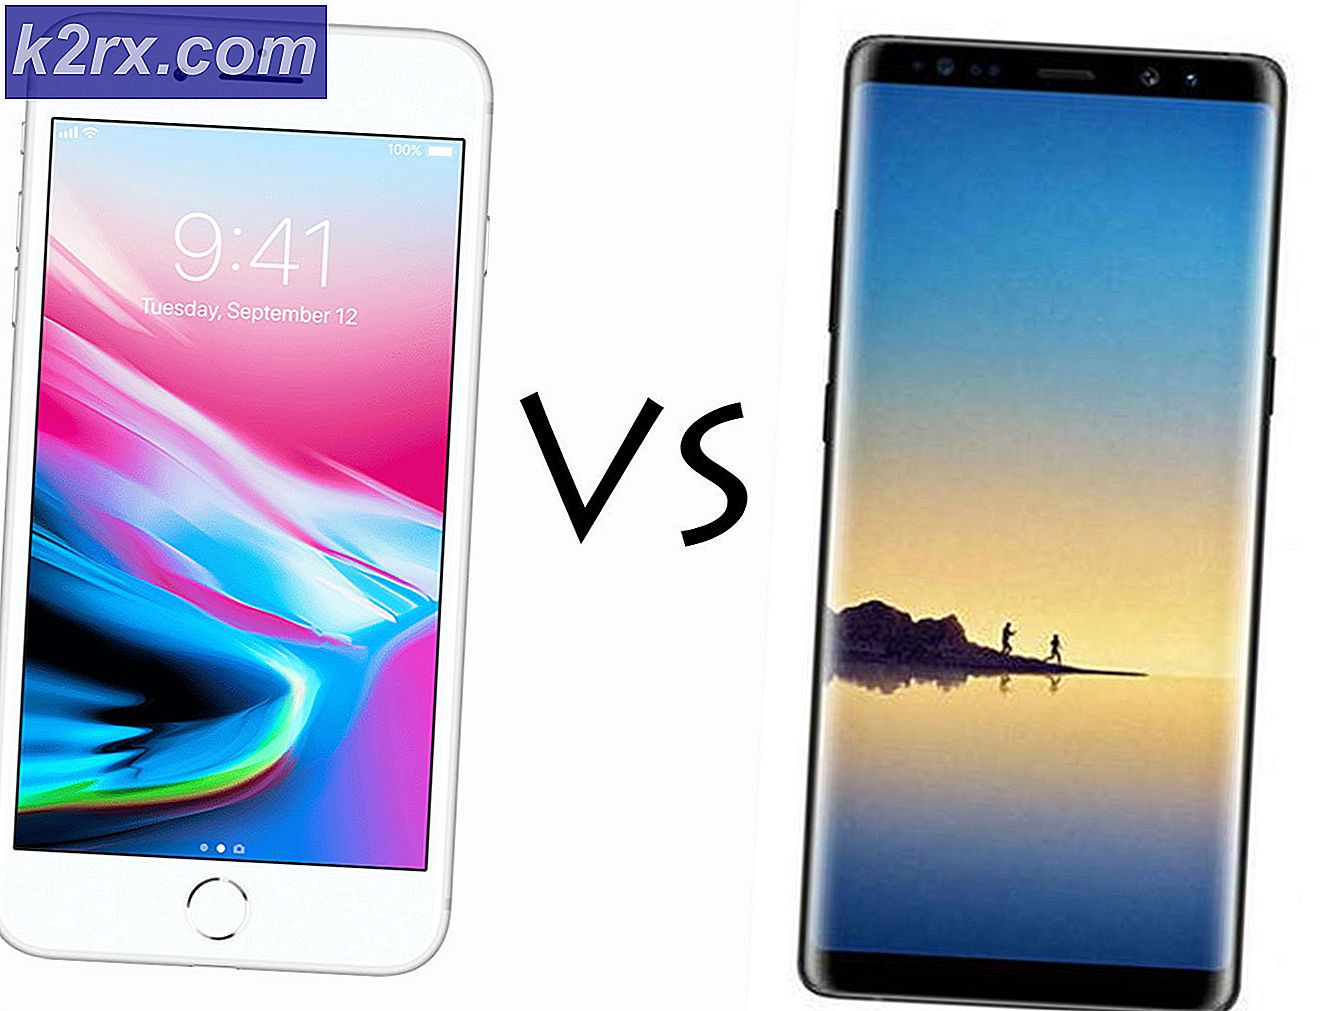 iPhone 8 Plus vs Samsung Galaxy Note 8: Phablet Category Duel